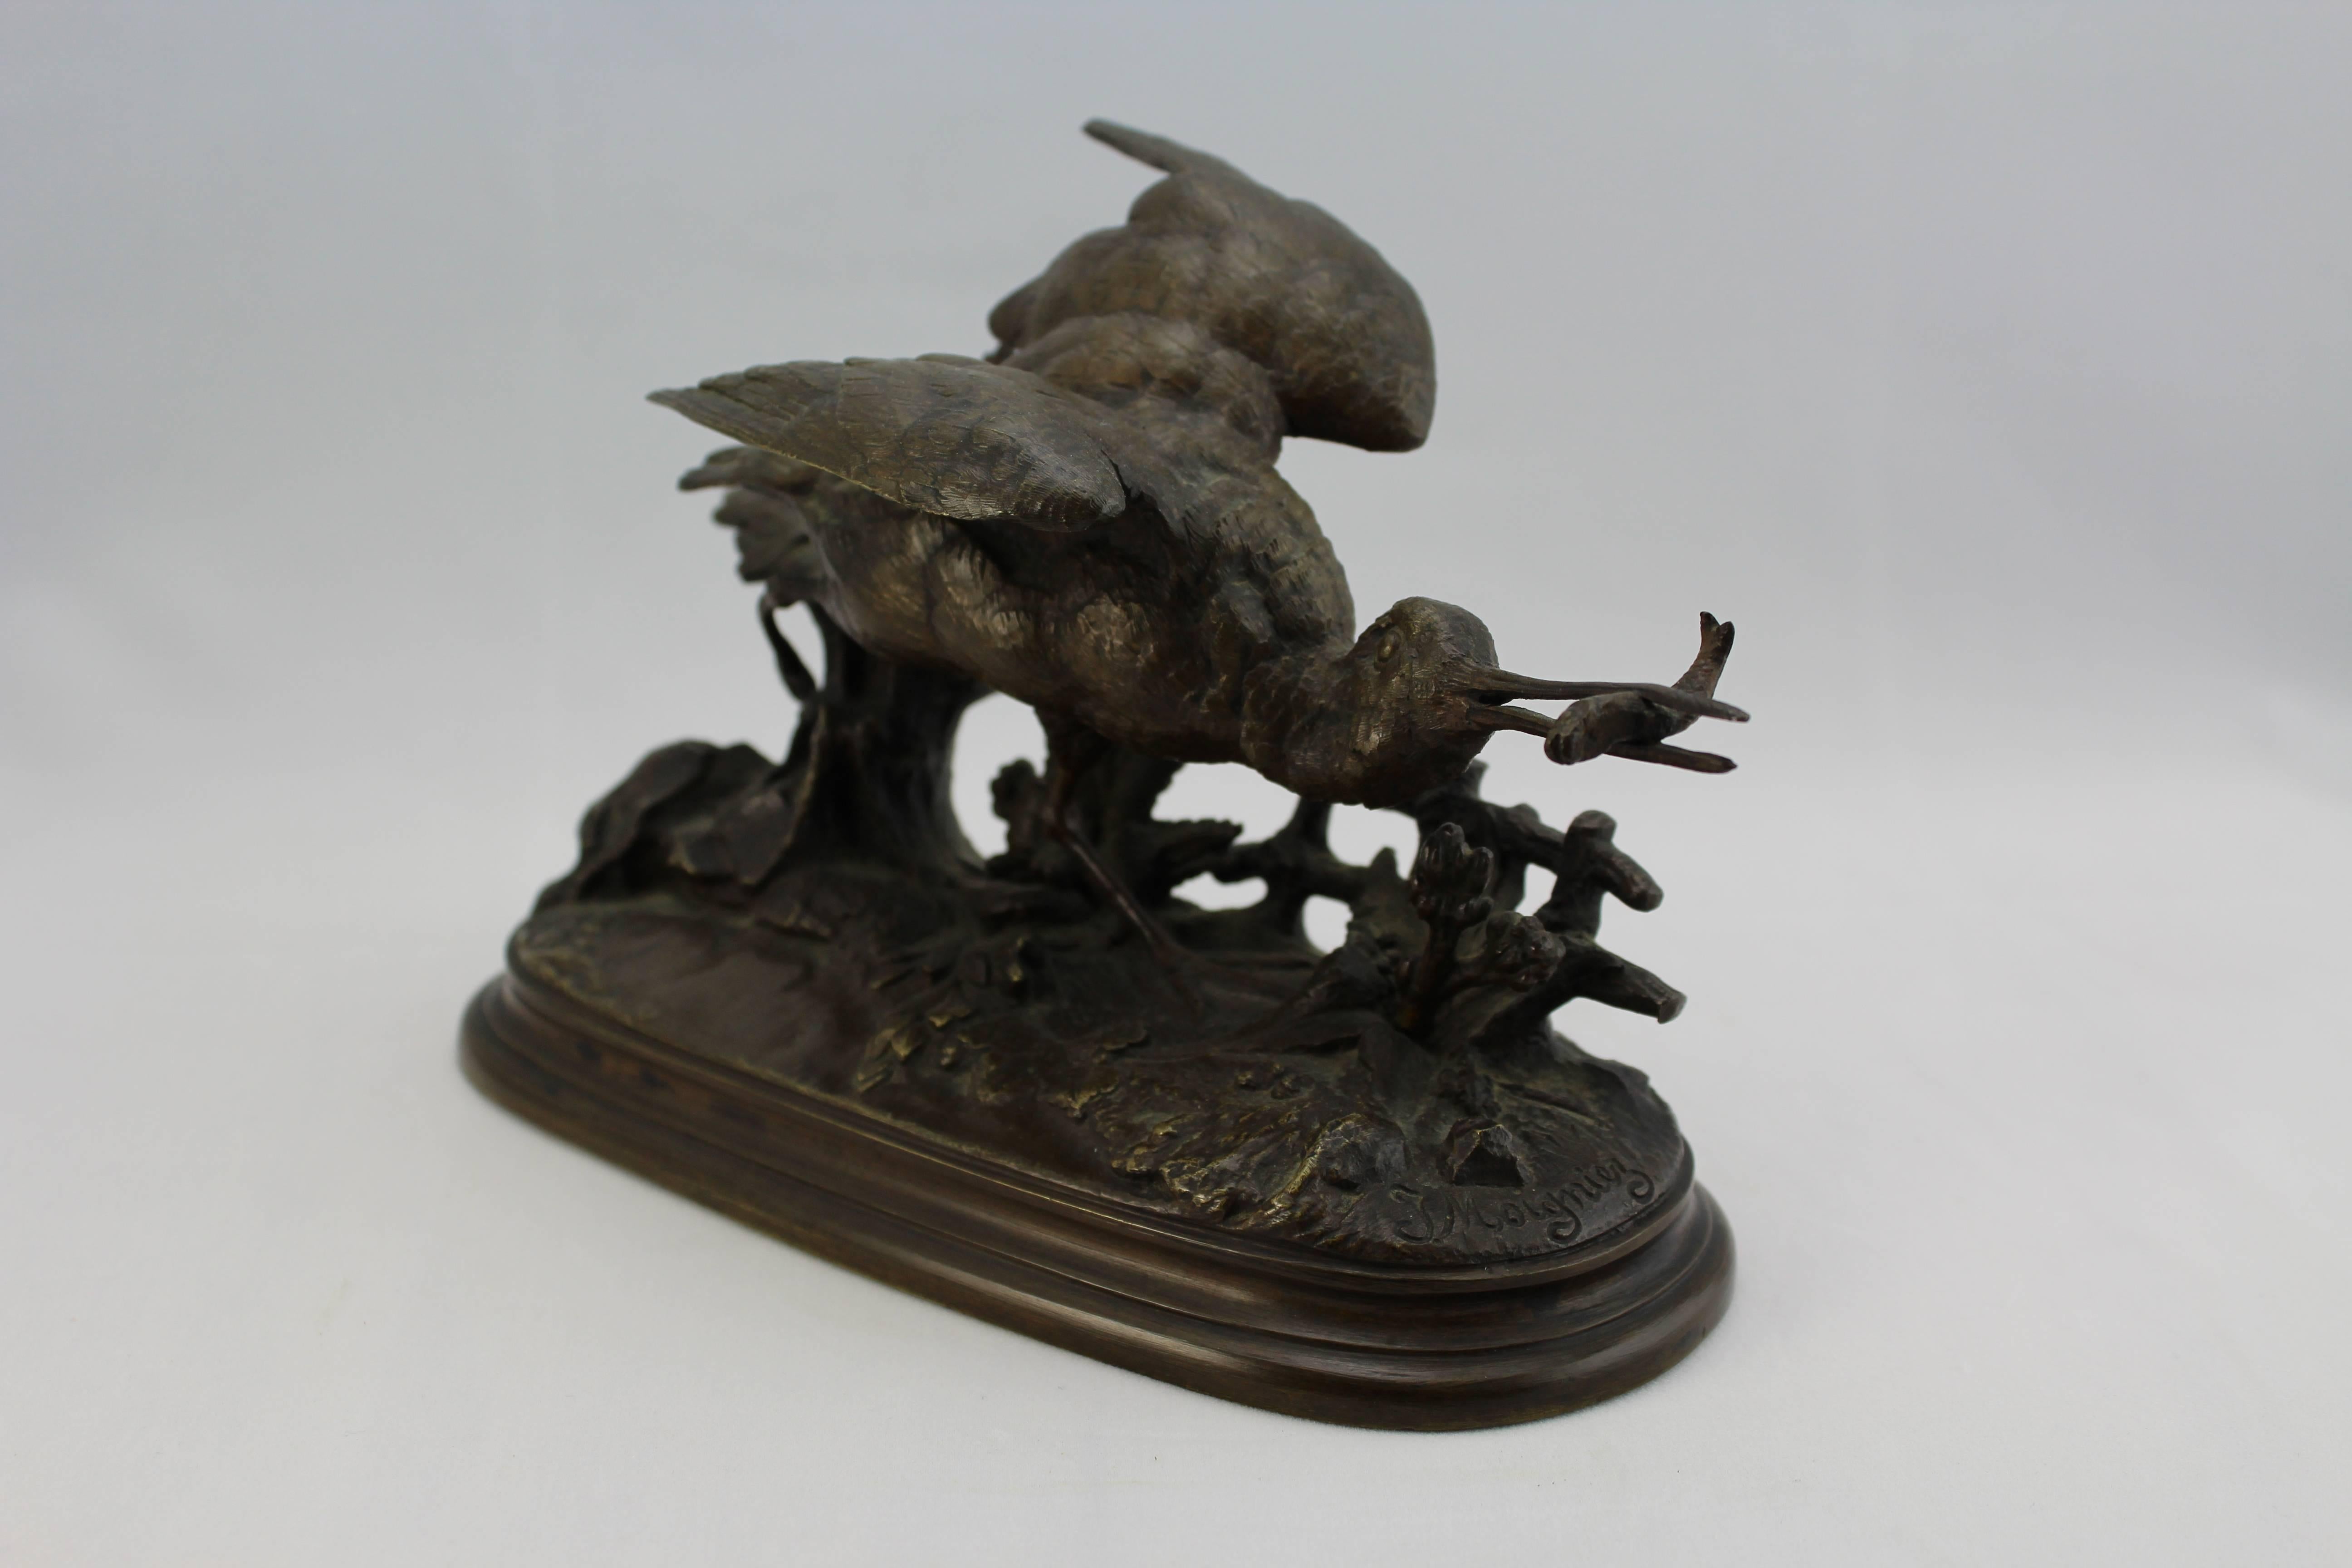 JULES MOIGNIEZ SANDPIPER. Ca. 1874.

This is a stunning and moving bronze sculpture by Jules Moigniez executed in the 19th century with breathtaking detail and realism. This bronze is well documented and to my knowledge; has not been recasted.